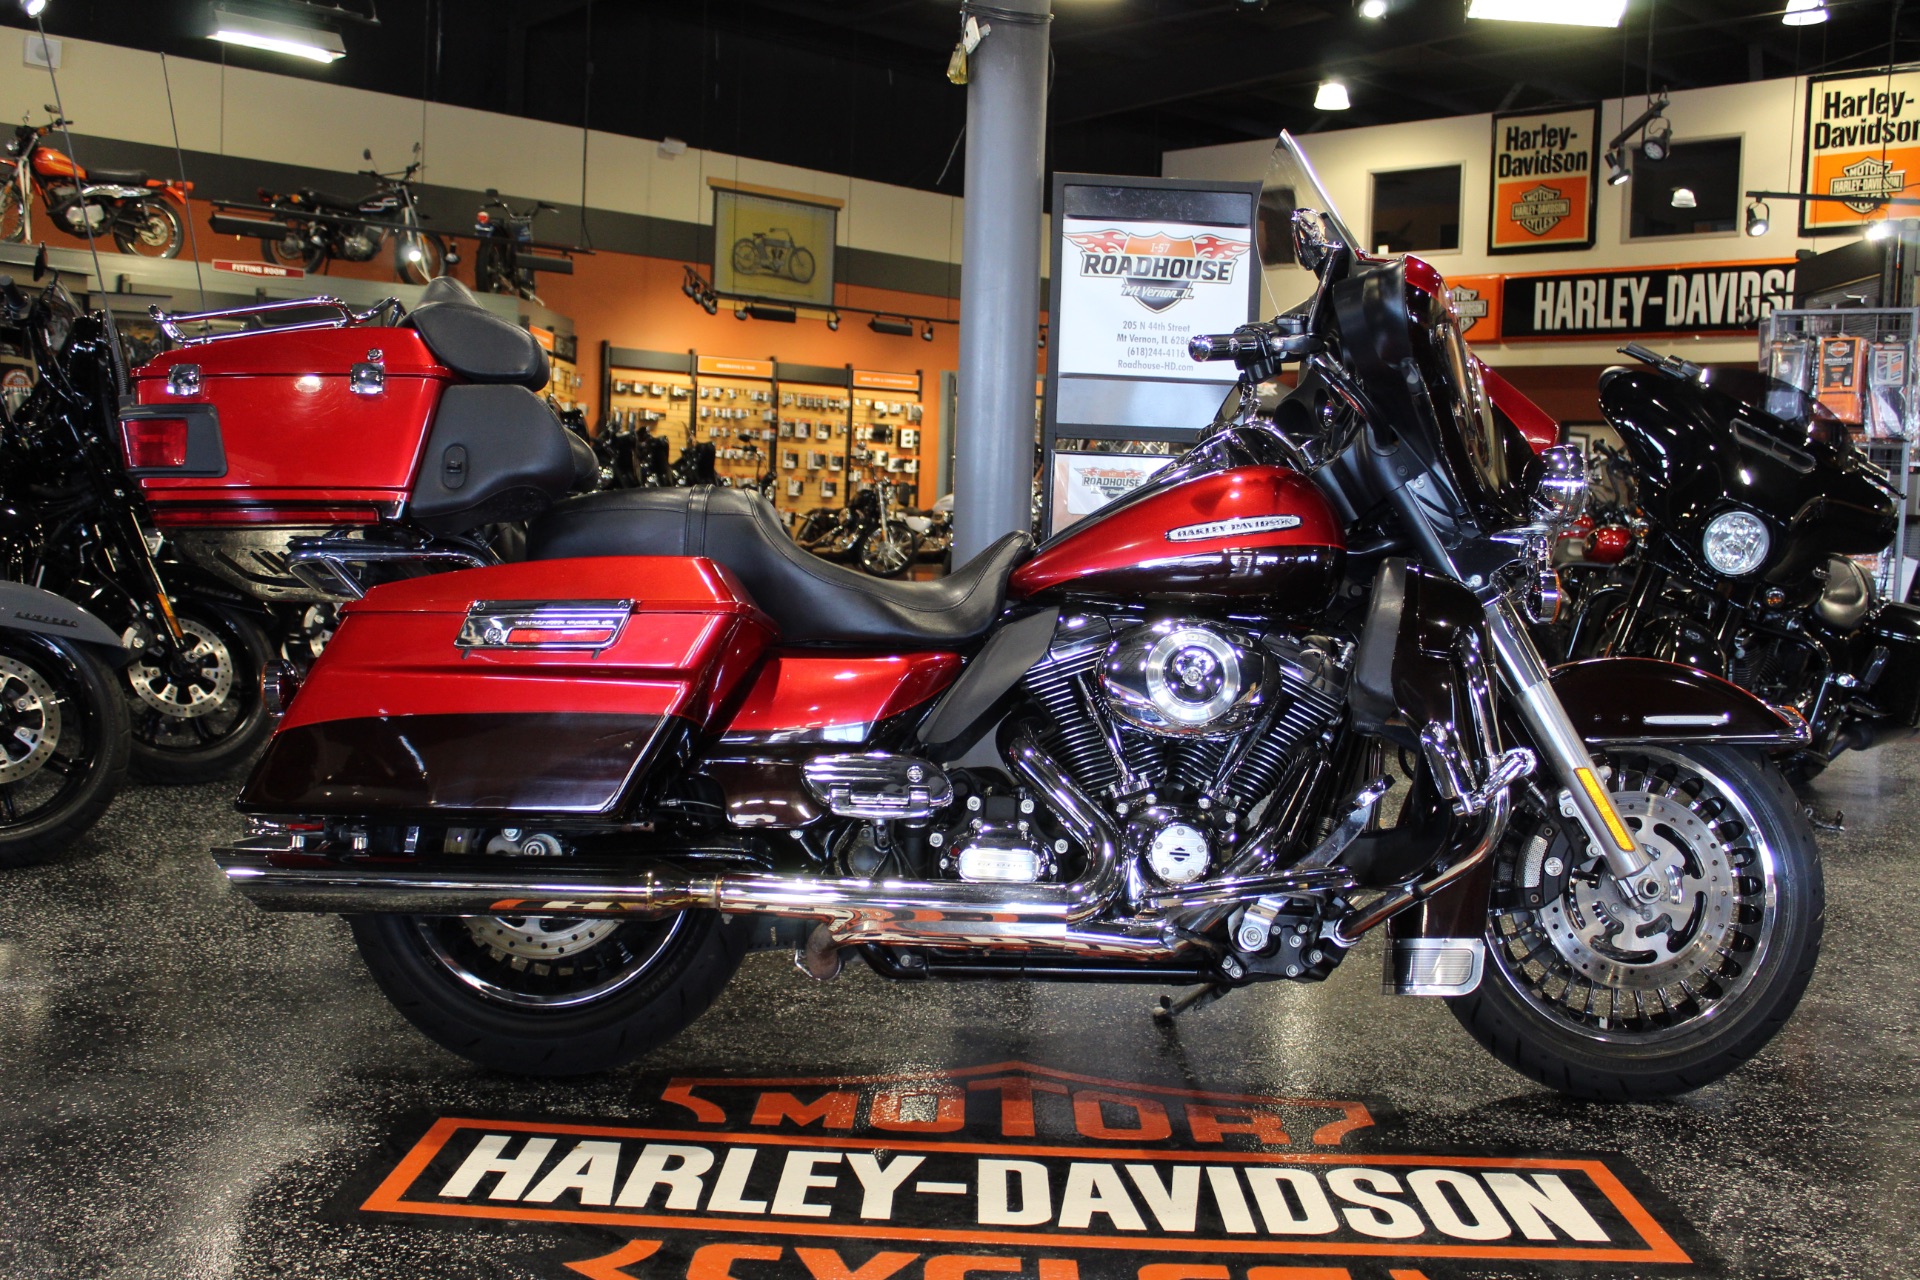 2013 Harley-Davidson Electra Glide® Ultra Limited in Mount Vernon, Illinois - Photo 1